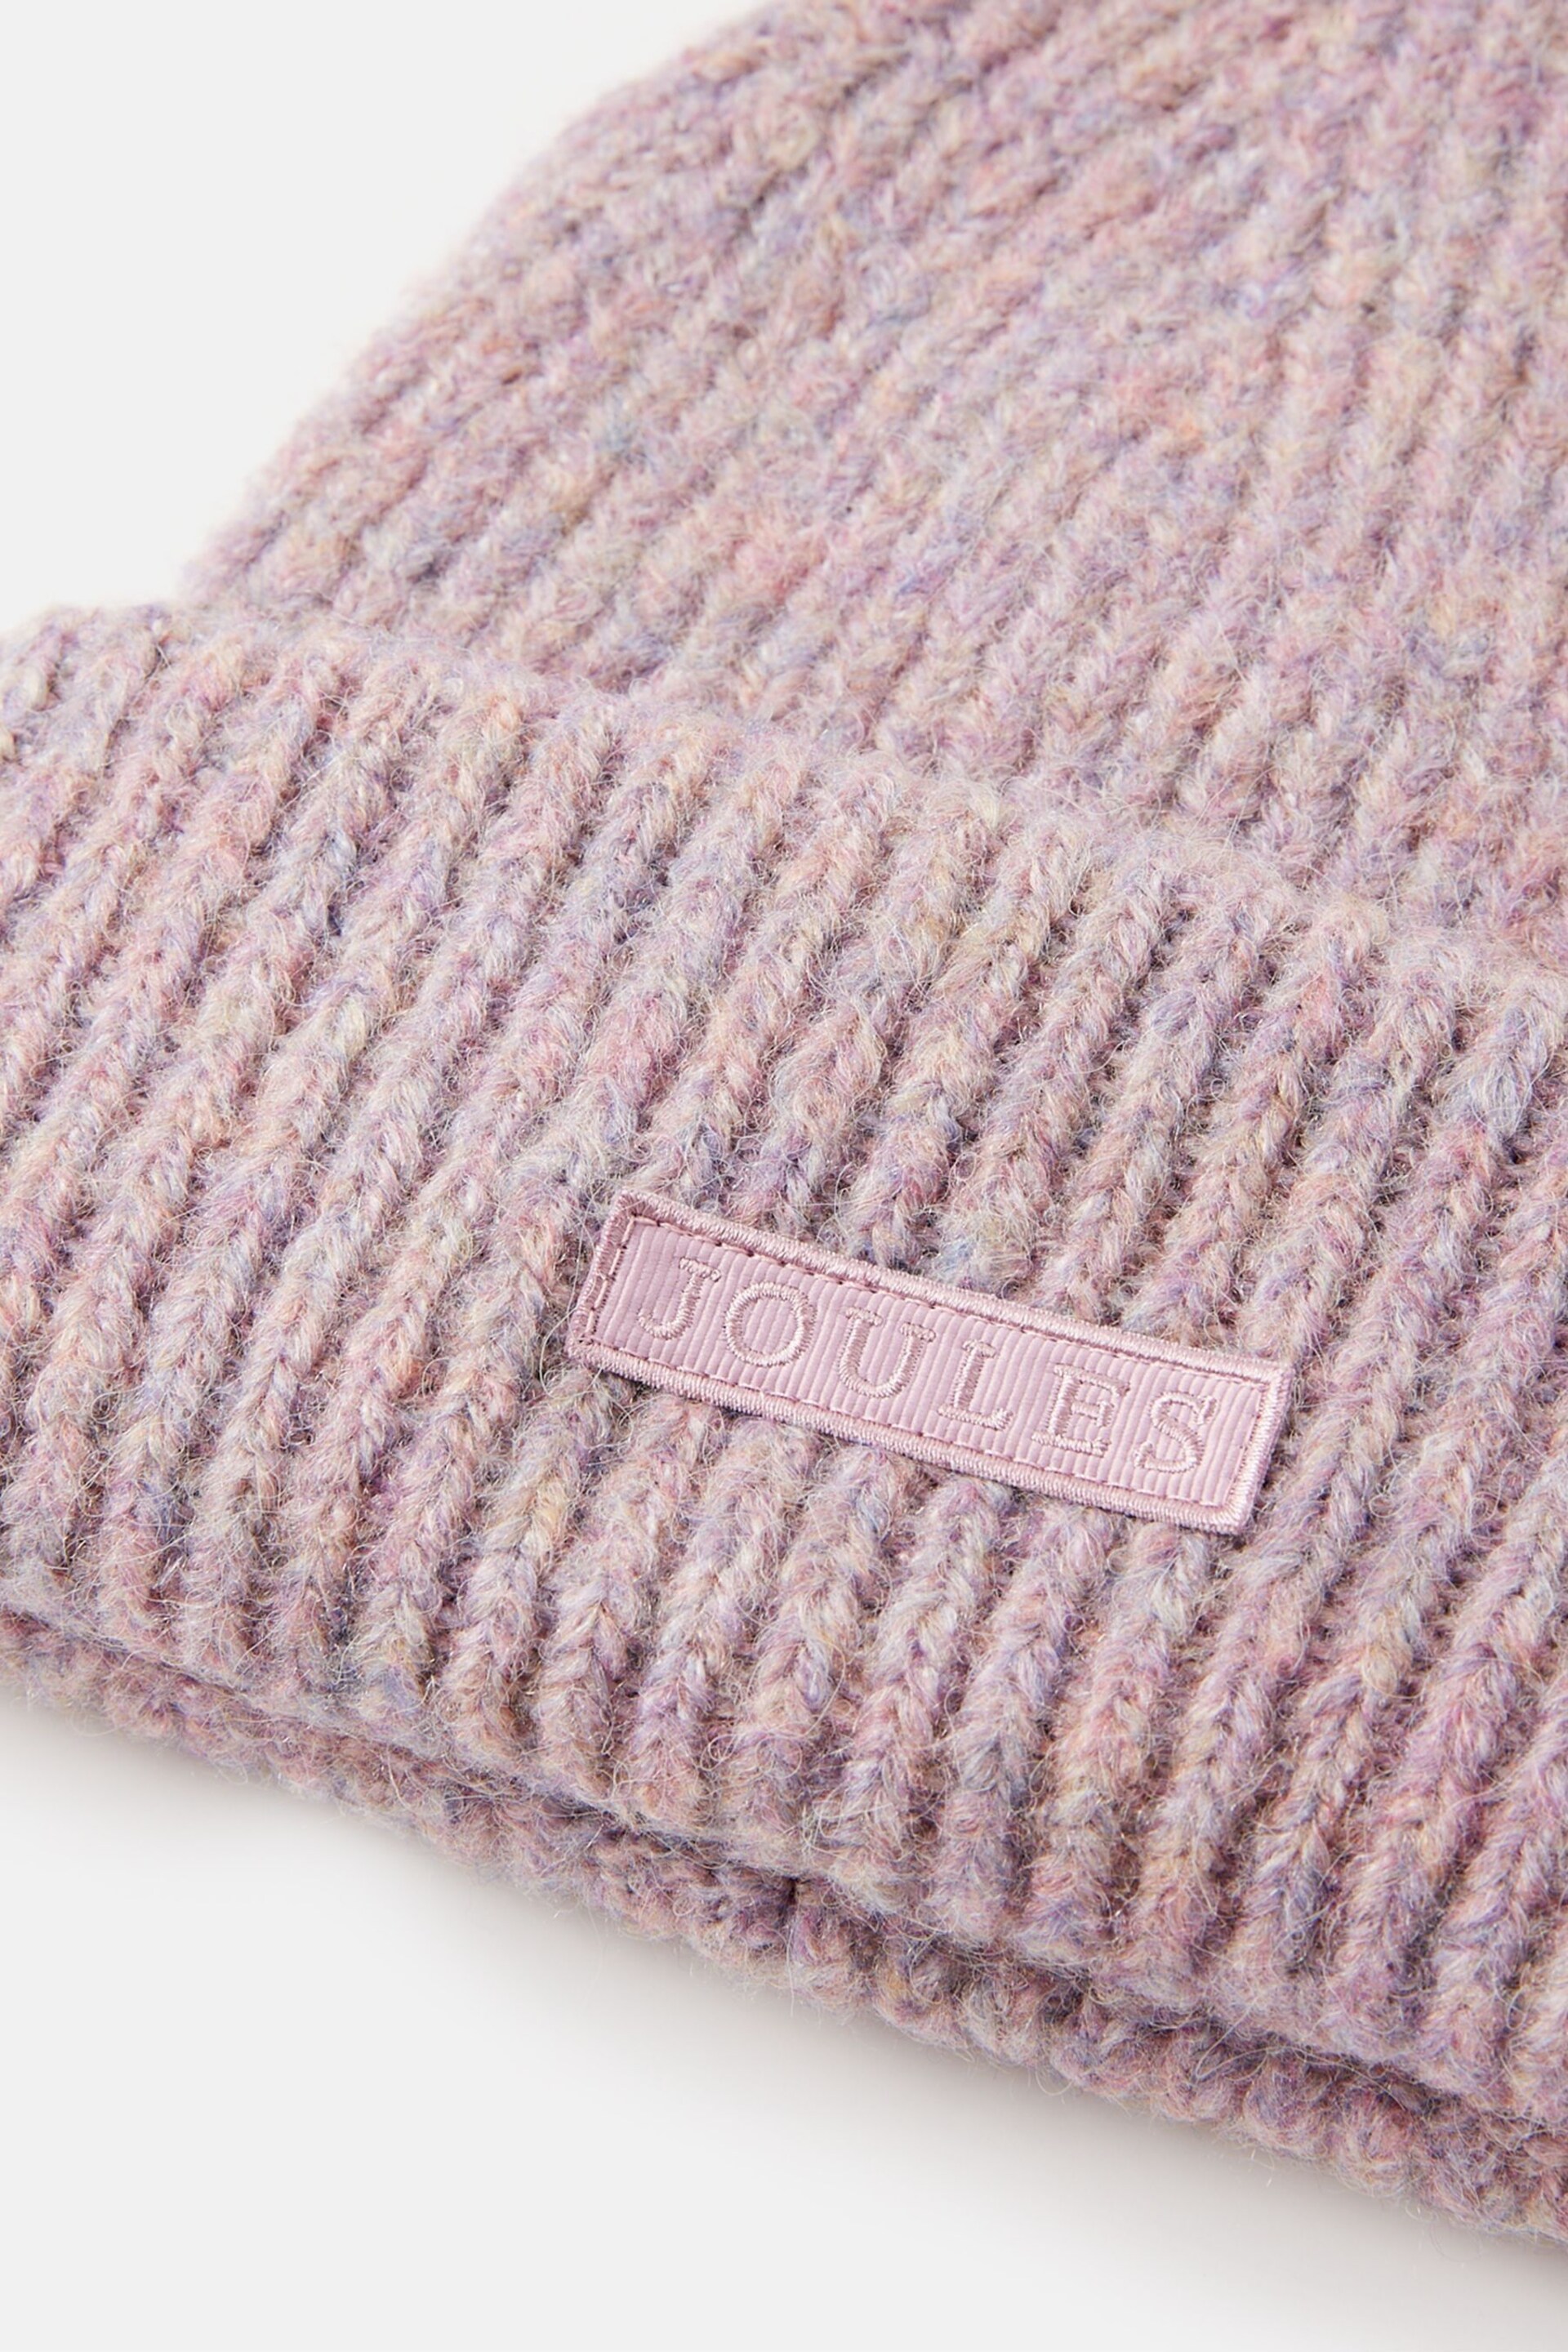 Joules Eloise Lilac Oversized Knitted Beanie Hat - Image 5 of 5